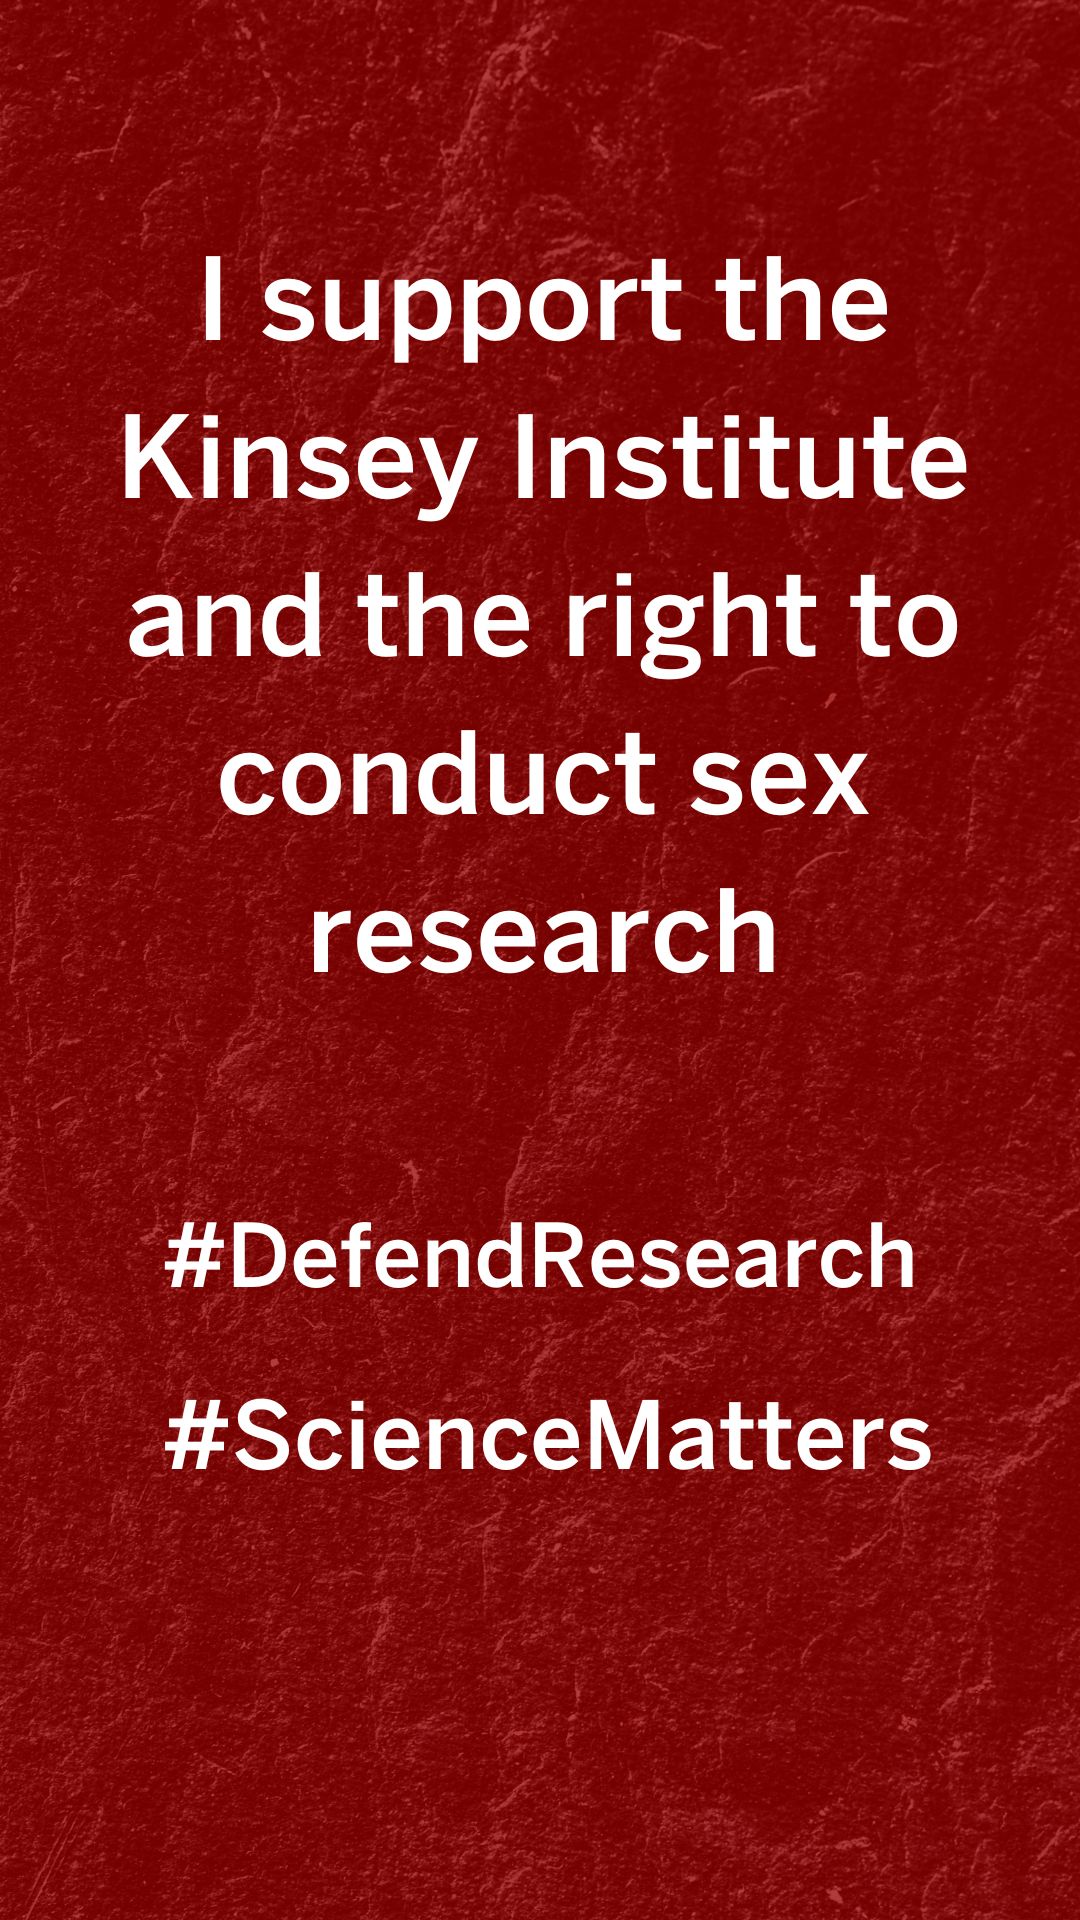 I support the Kinsey Institute and the right to conduct sex research.